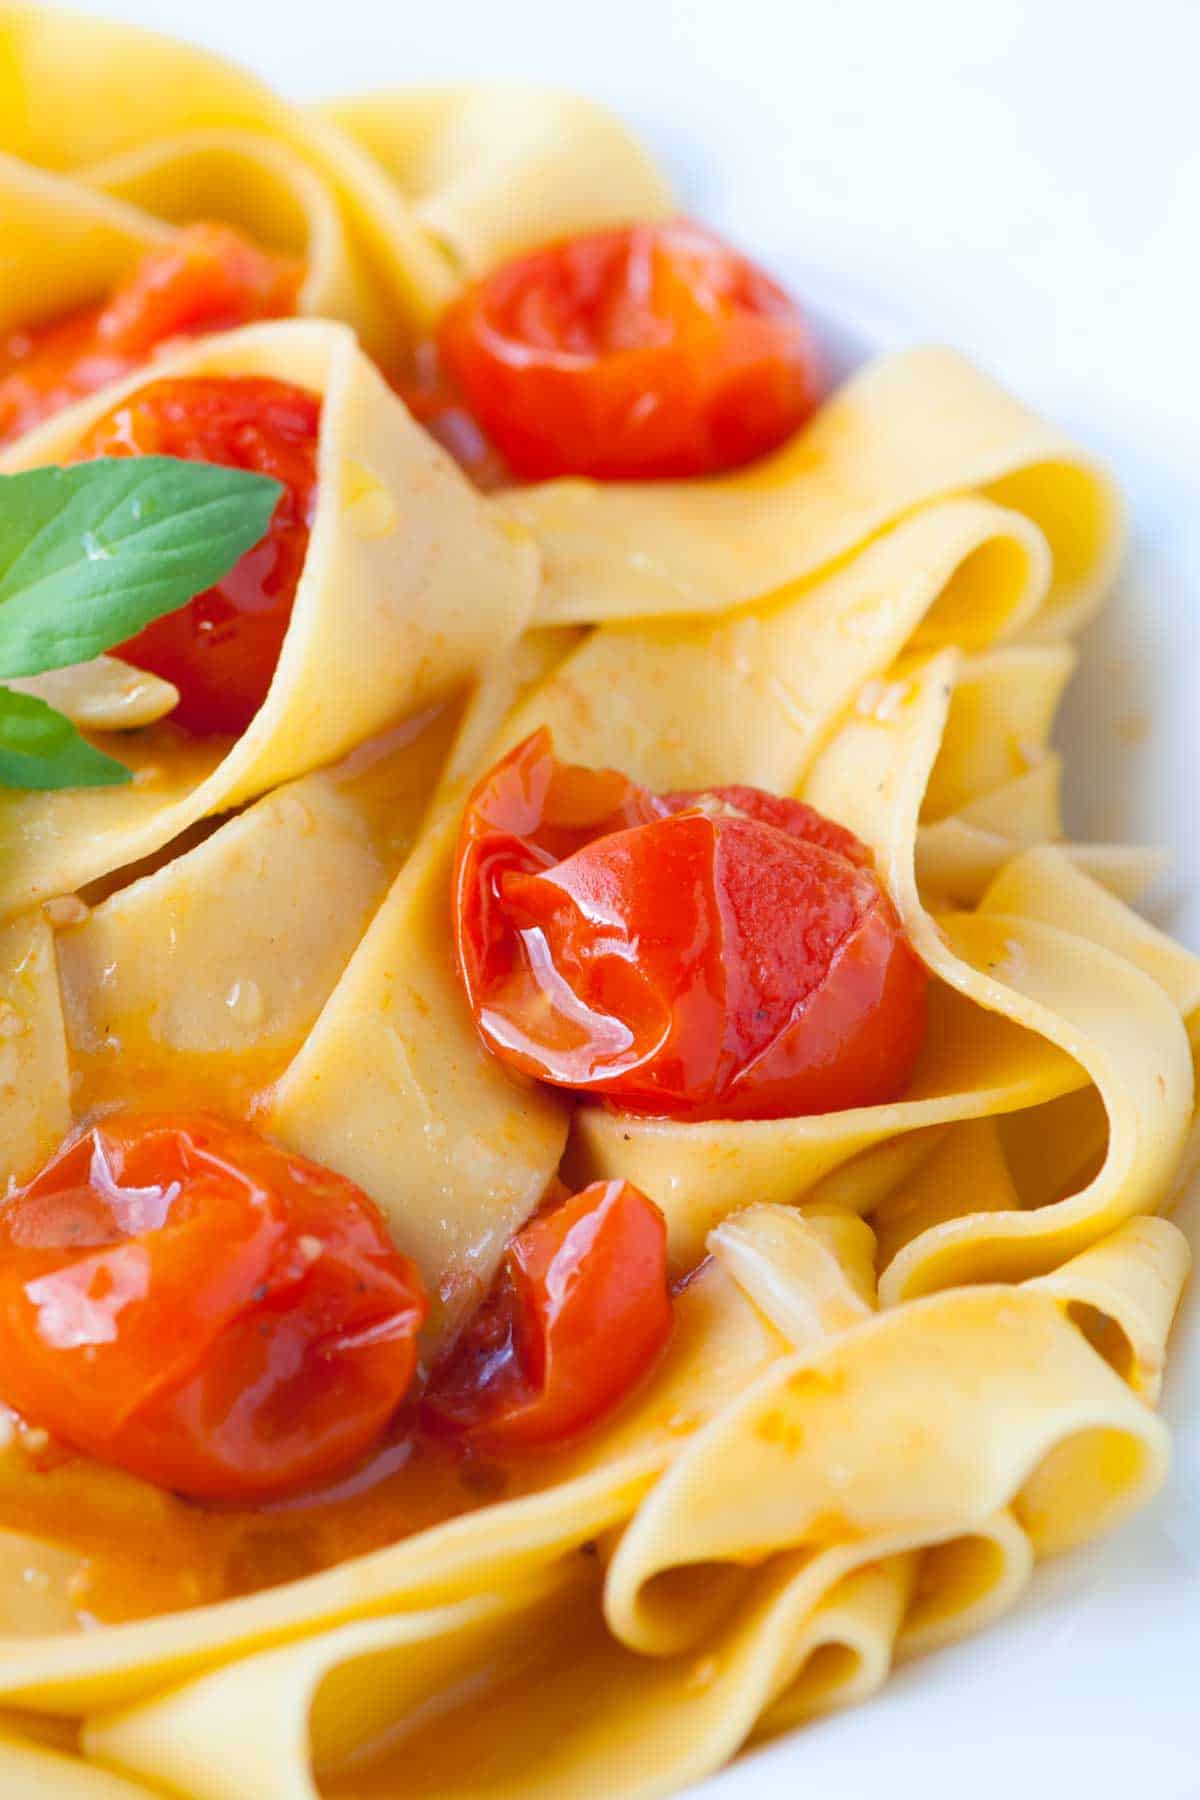 How to Make Roasted Tomato Pasta with Cardamom and Garlic